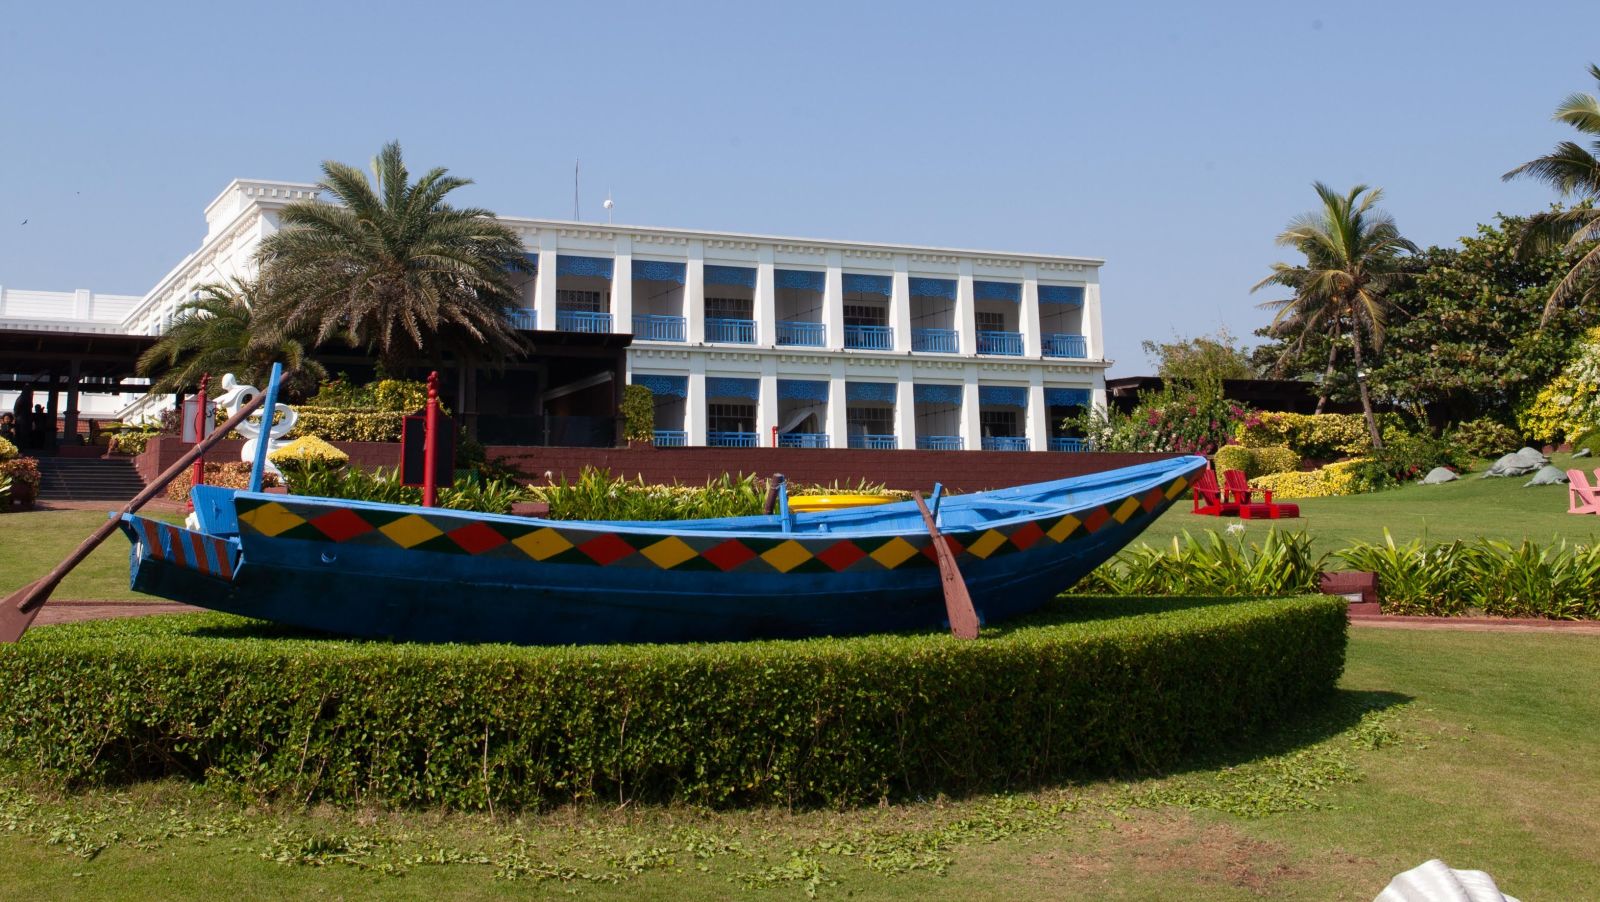 view of the exterior of the resort from afar - Mayfair Palm Beach Resort, Gopalpur-on-Sea 